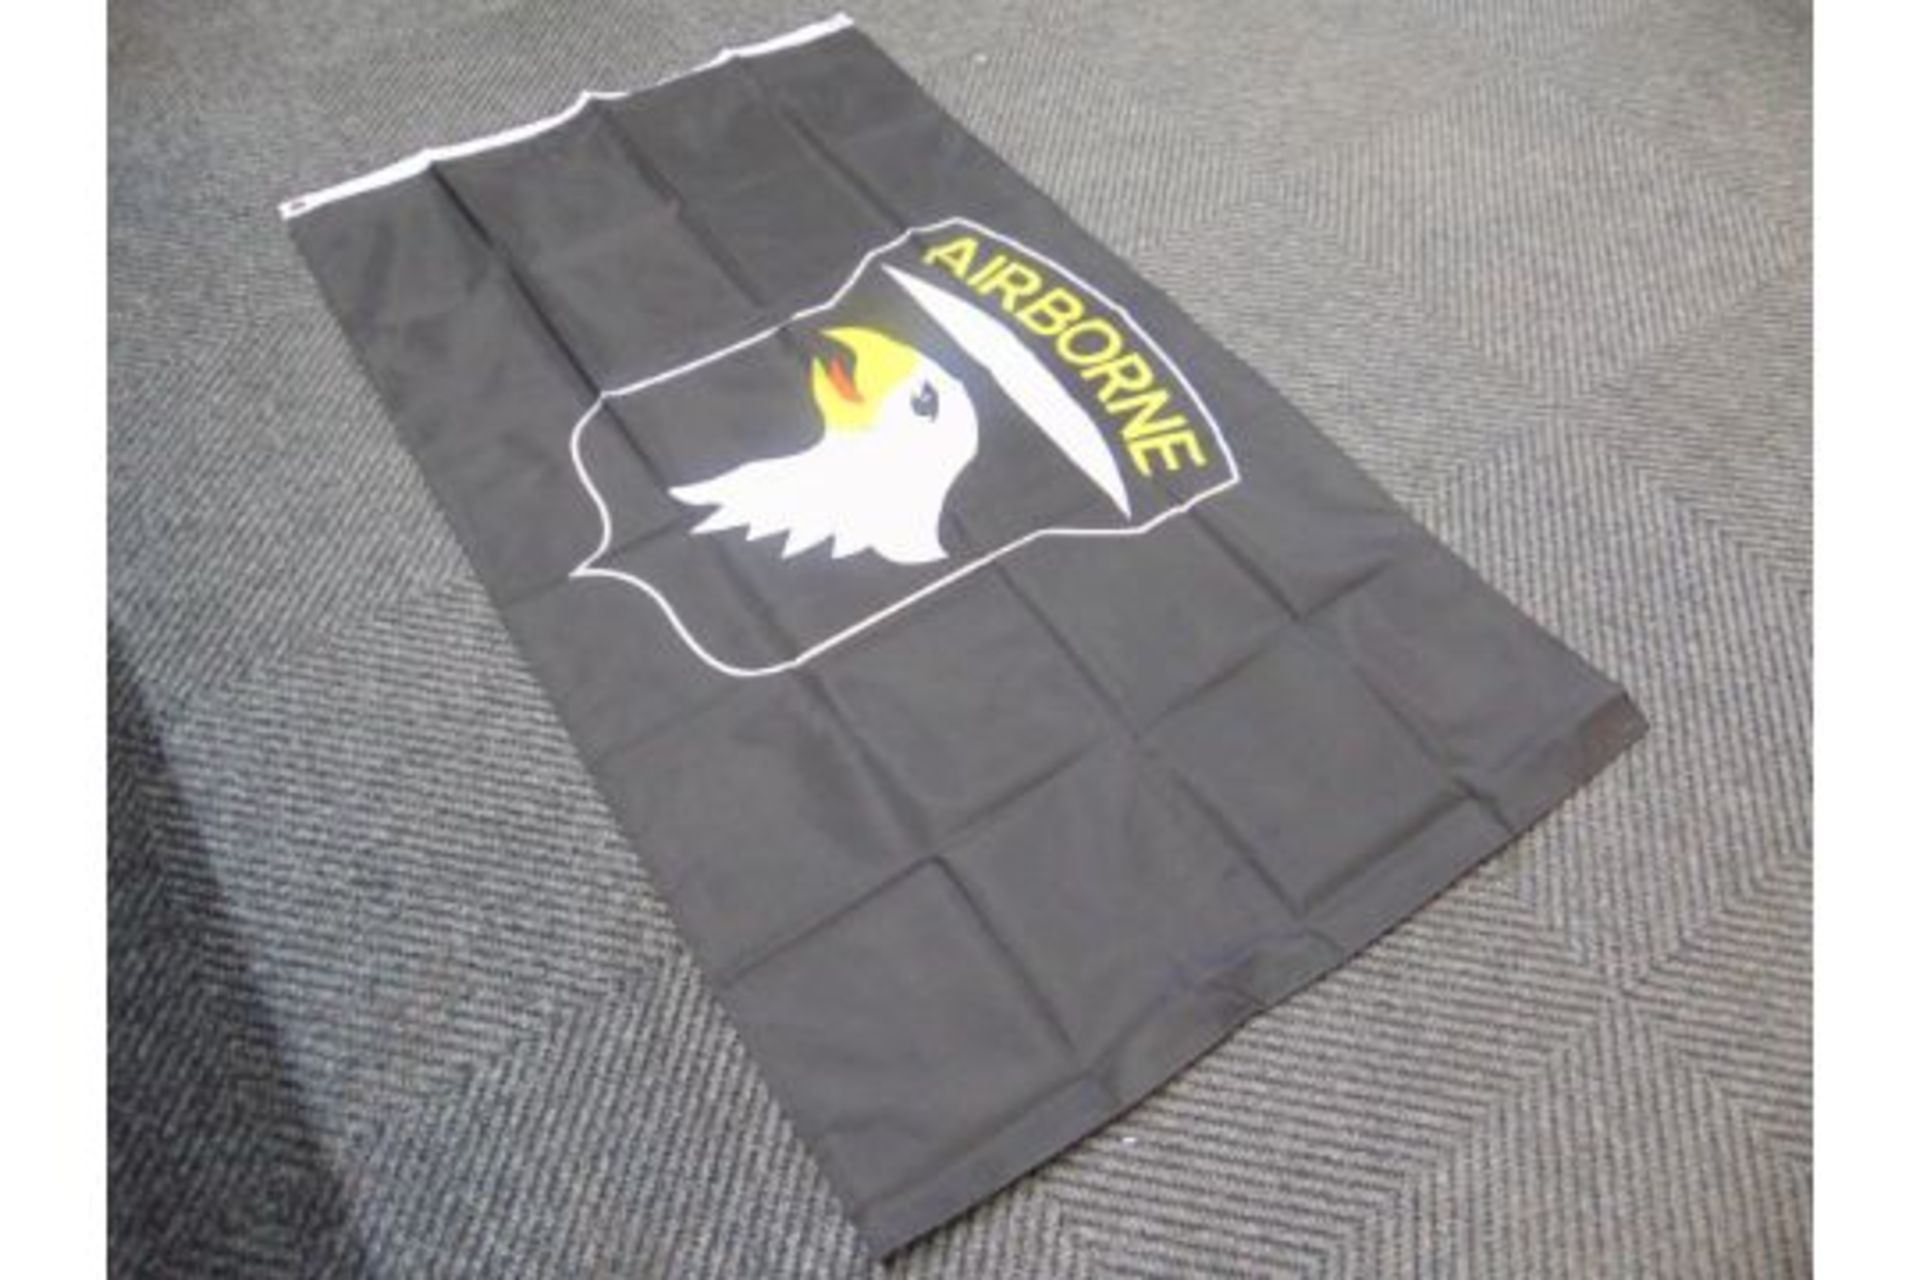 101st Airborne (Black) Flag - 5ft x 3ft with metal eyelets - Image 4 of 4